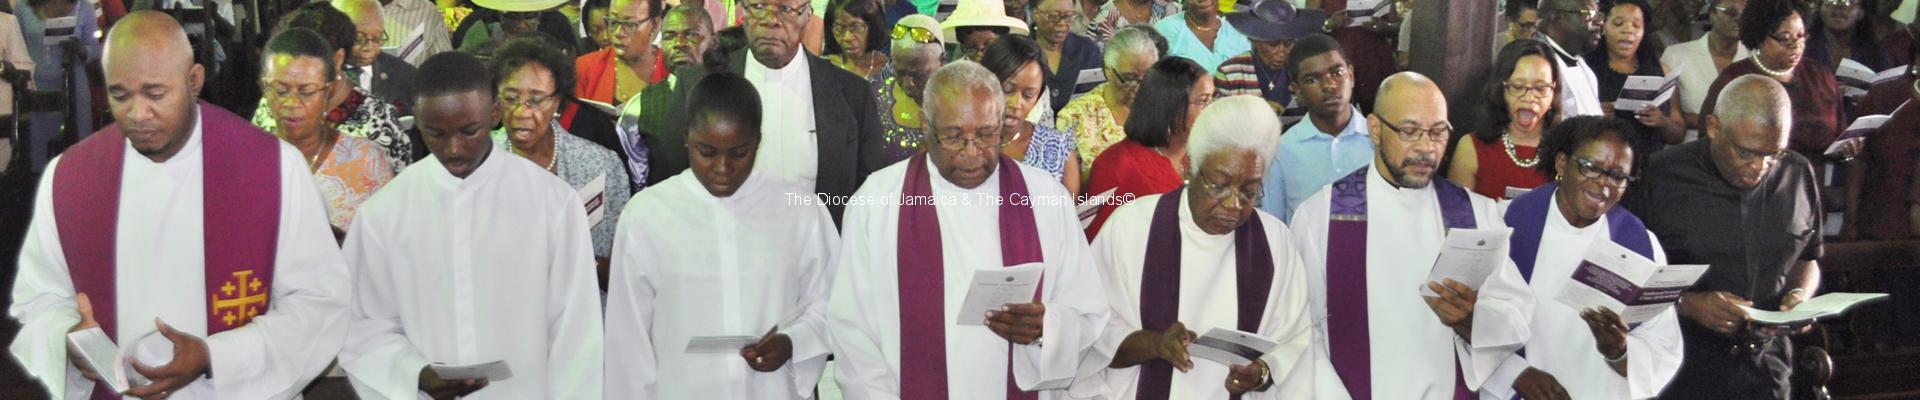 Diocese of Jamaica & The Cayman Islands